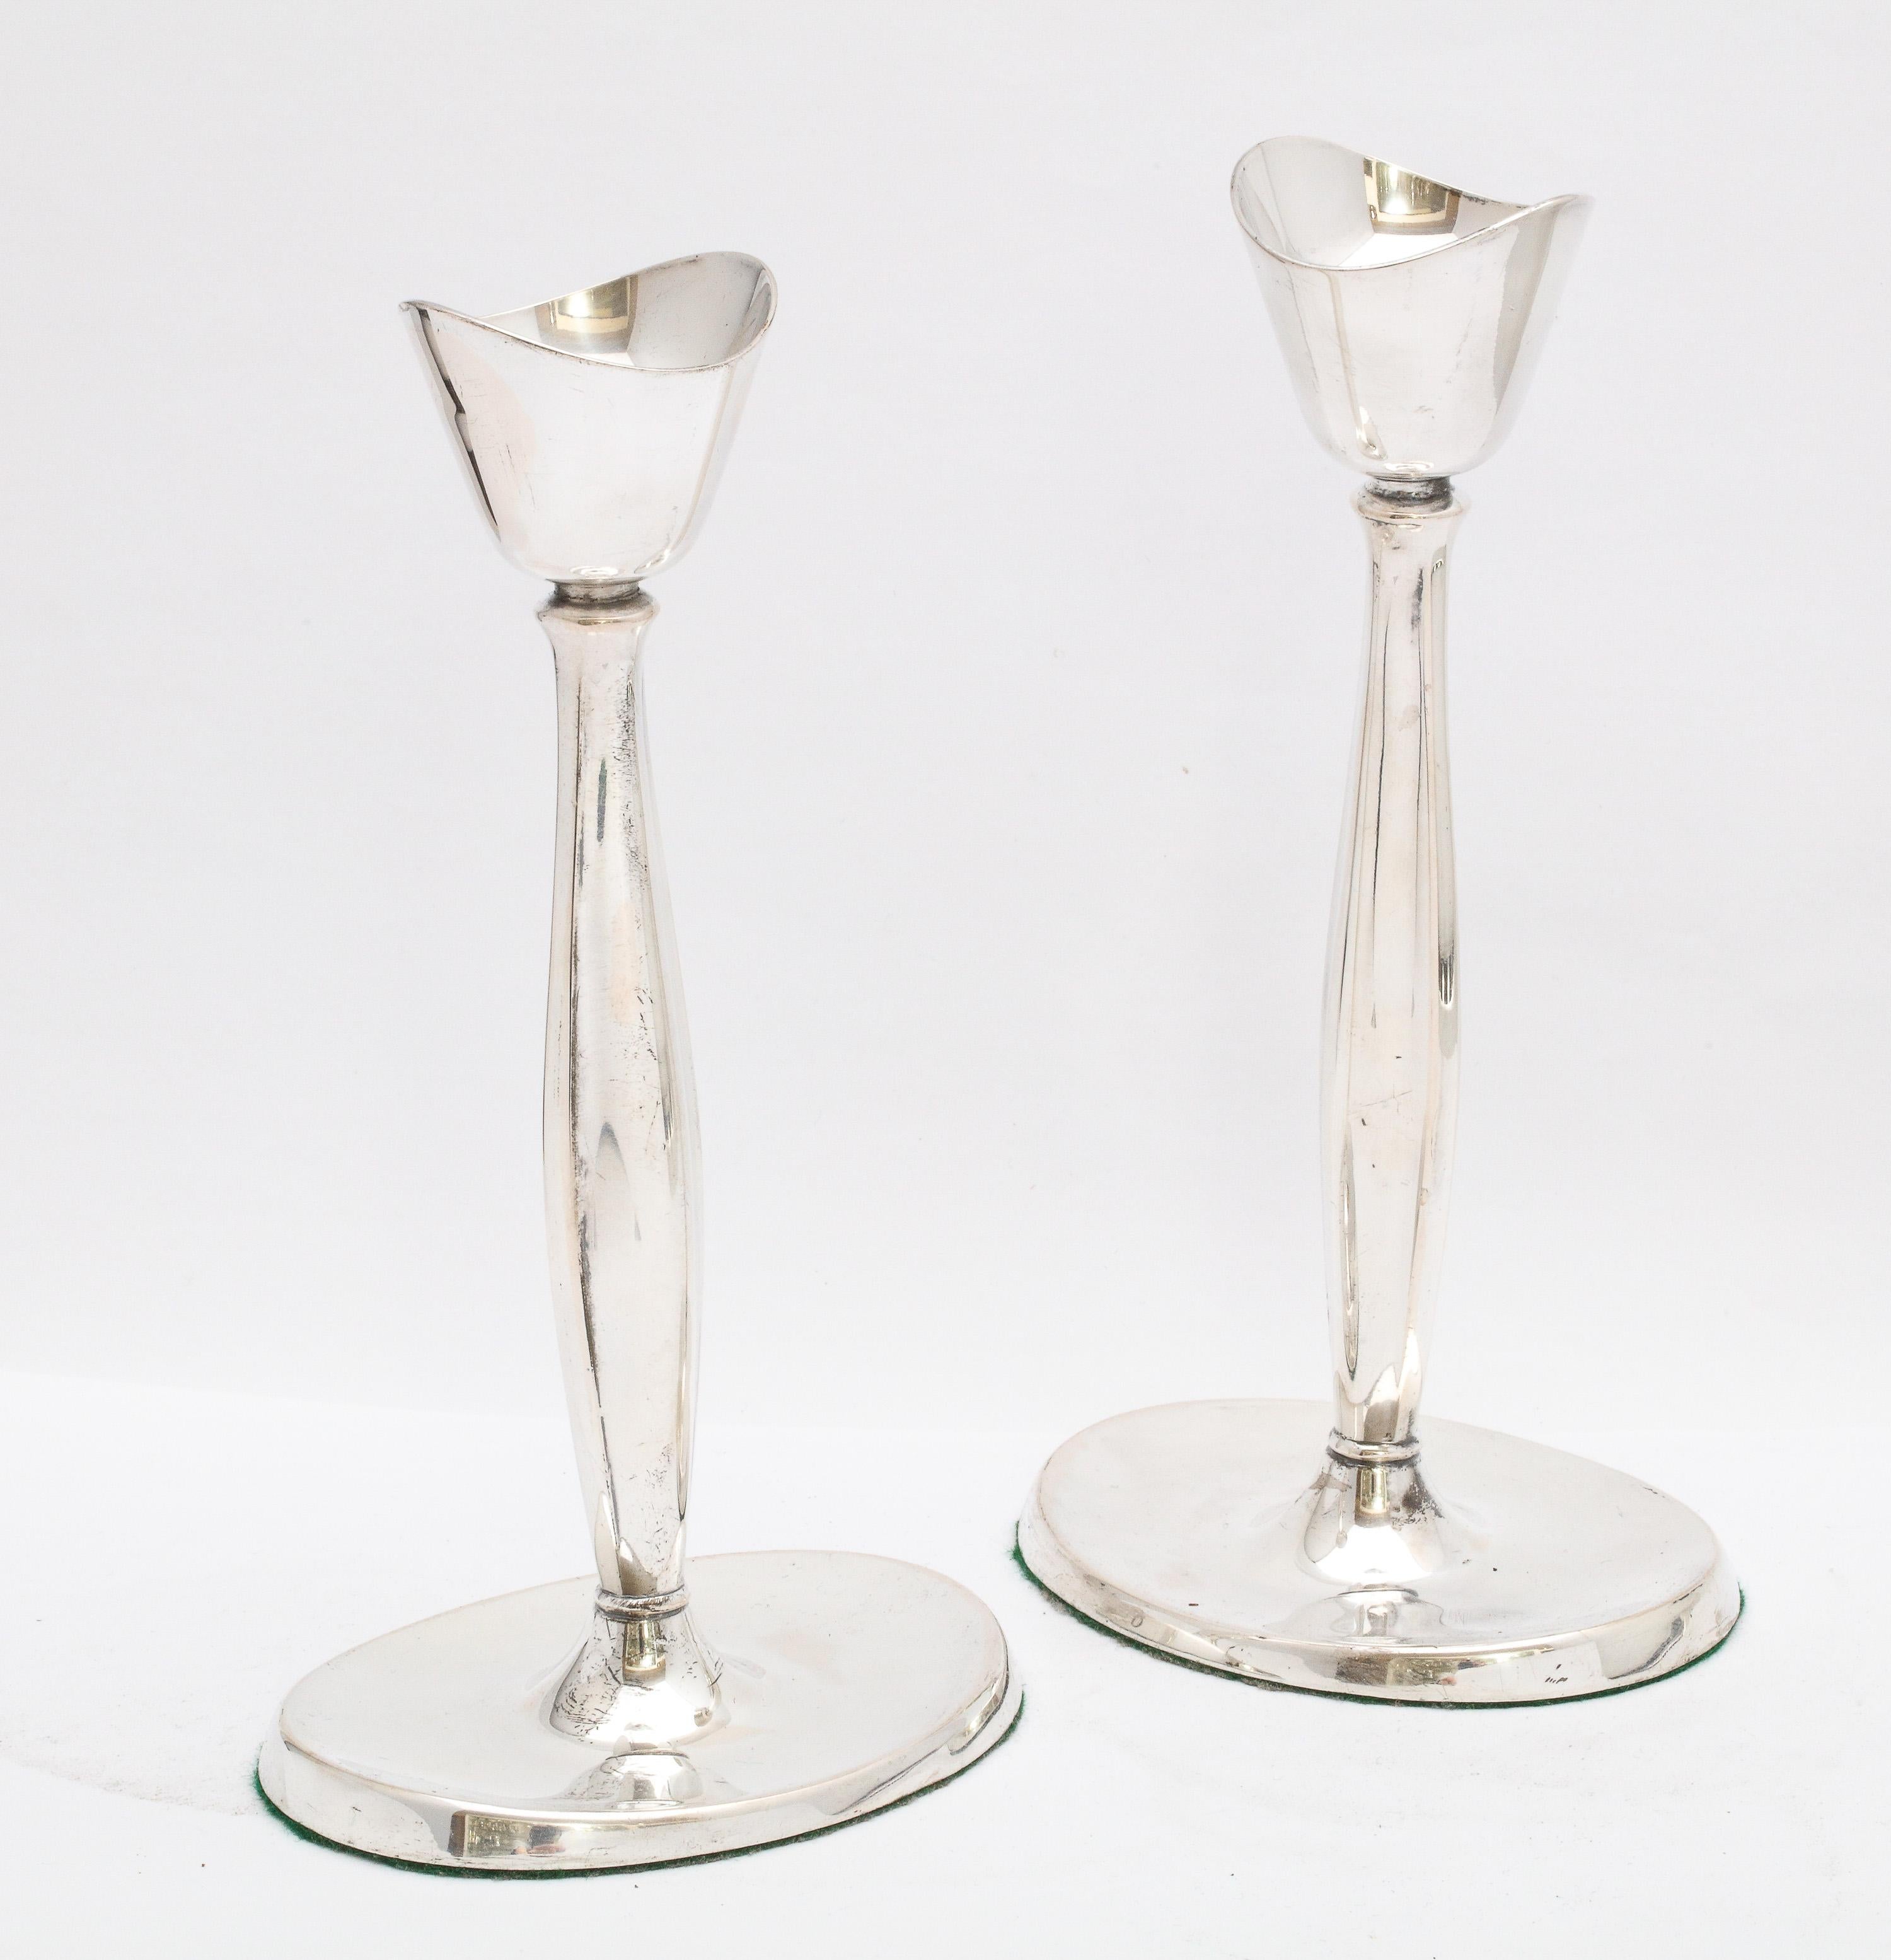 Pair of Mid-Century Modern, sterling silver candlesticks, Denmark, Ca. 1940's, Cohr - maker. Graceful design, each candlestick having an oval base and lightly fluted column. Each candlestick measures 7 1/2 inches high x 4 inches wide (across oval